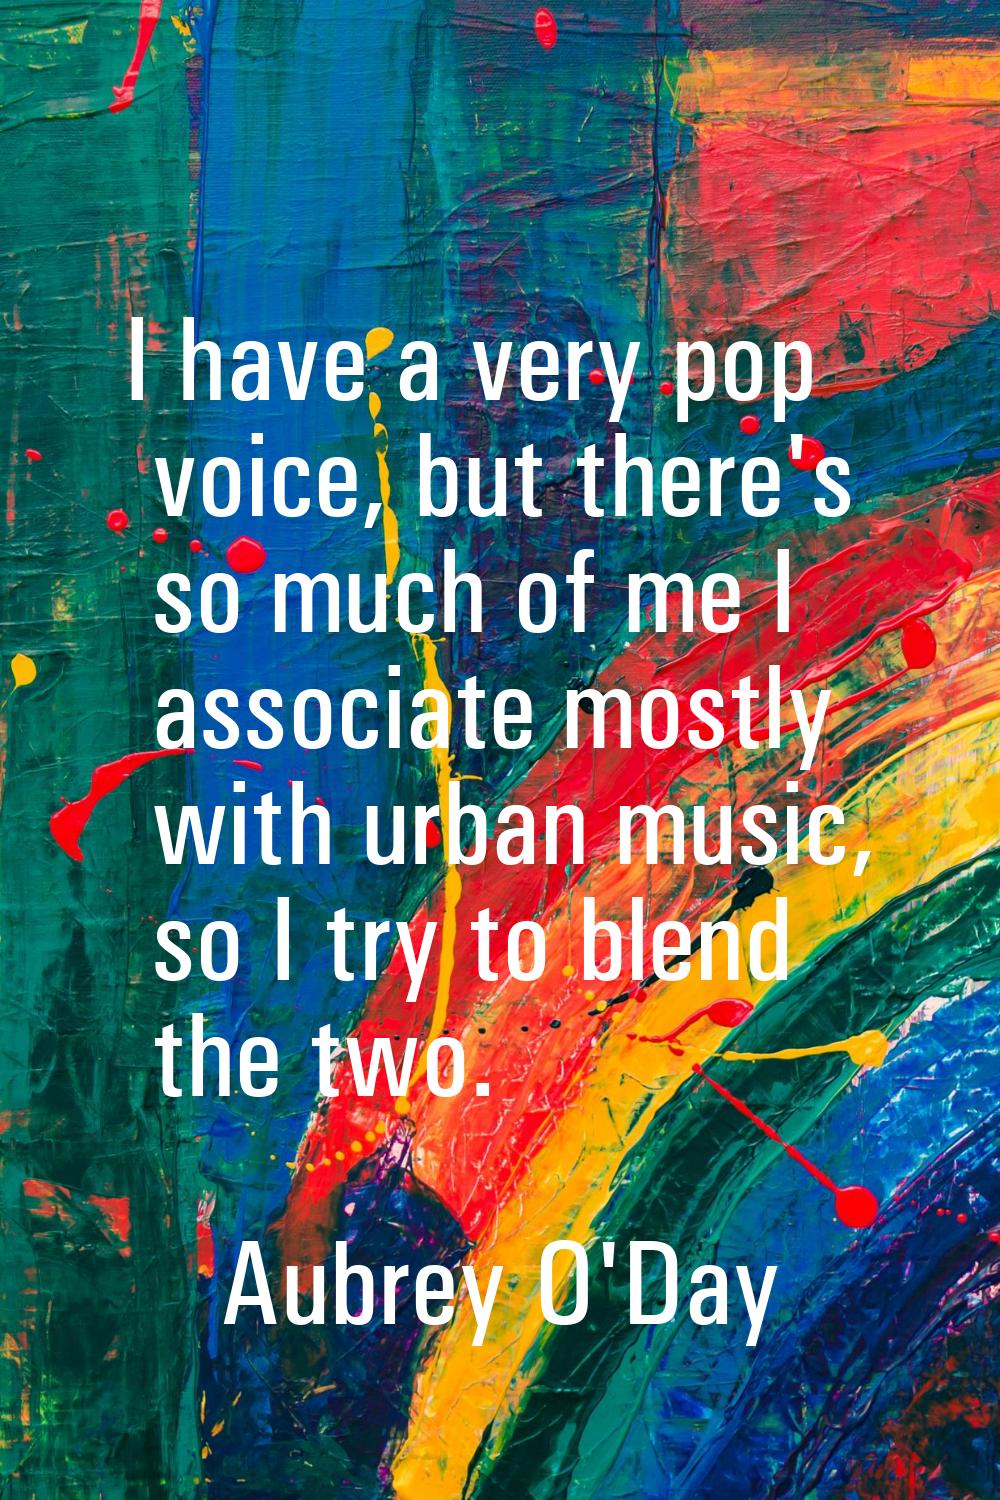 I have a very pop voice, but there's so much of me I associate mostly with urban music, so I try to